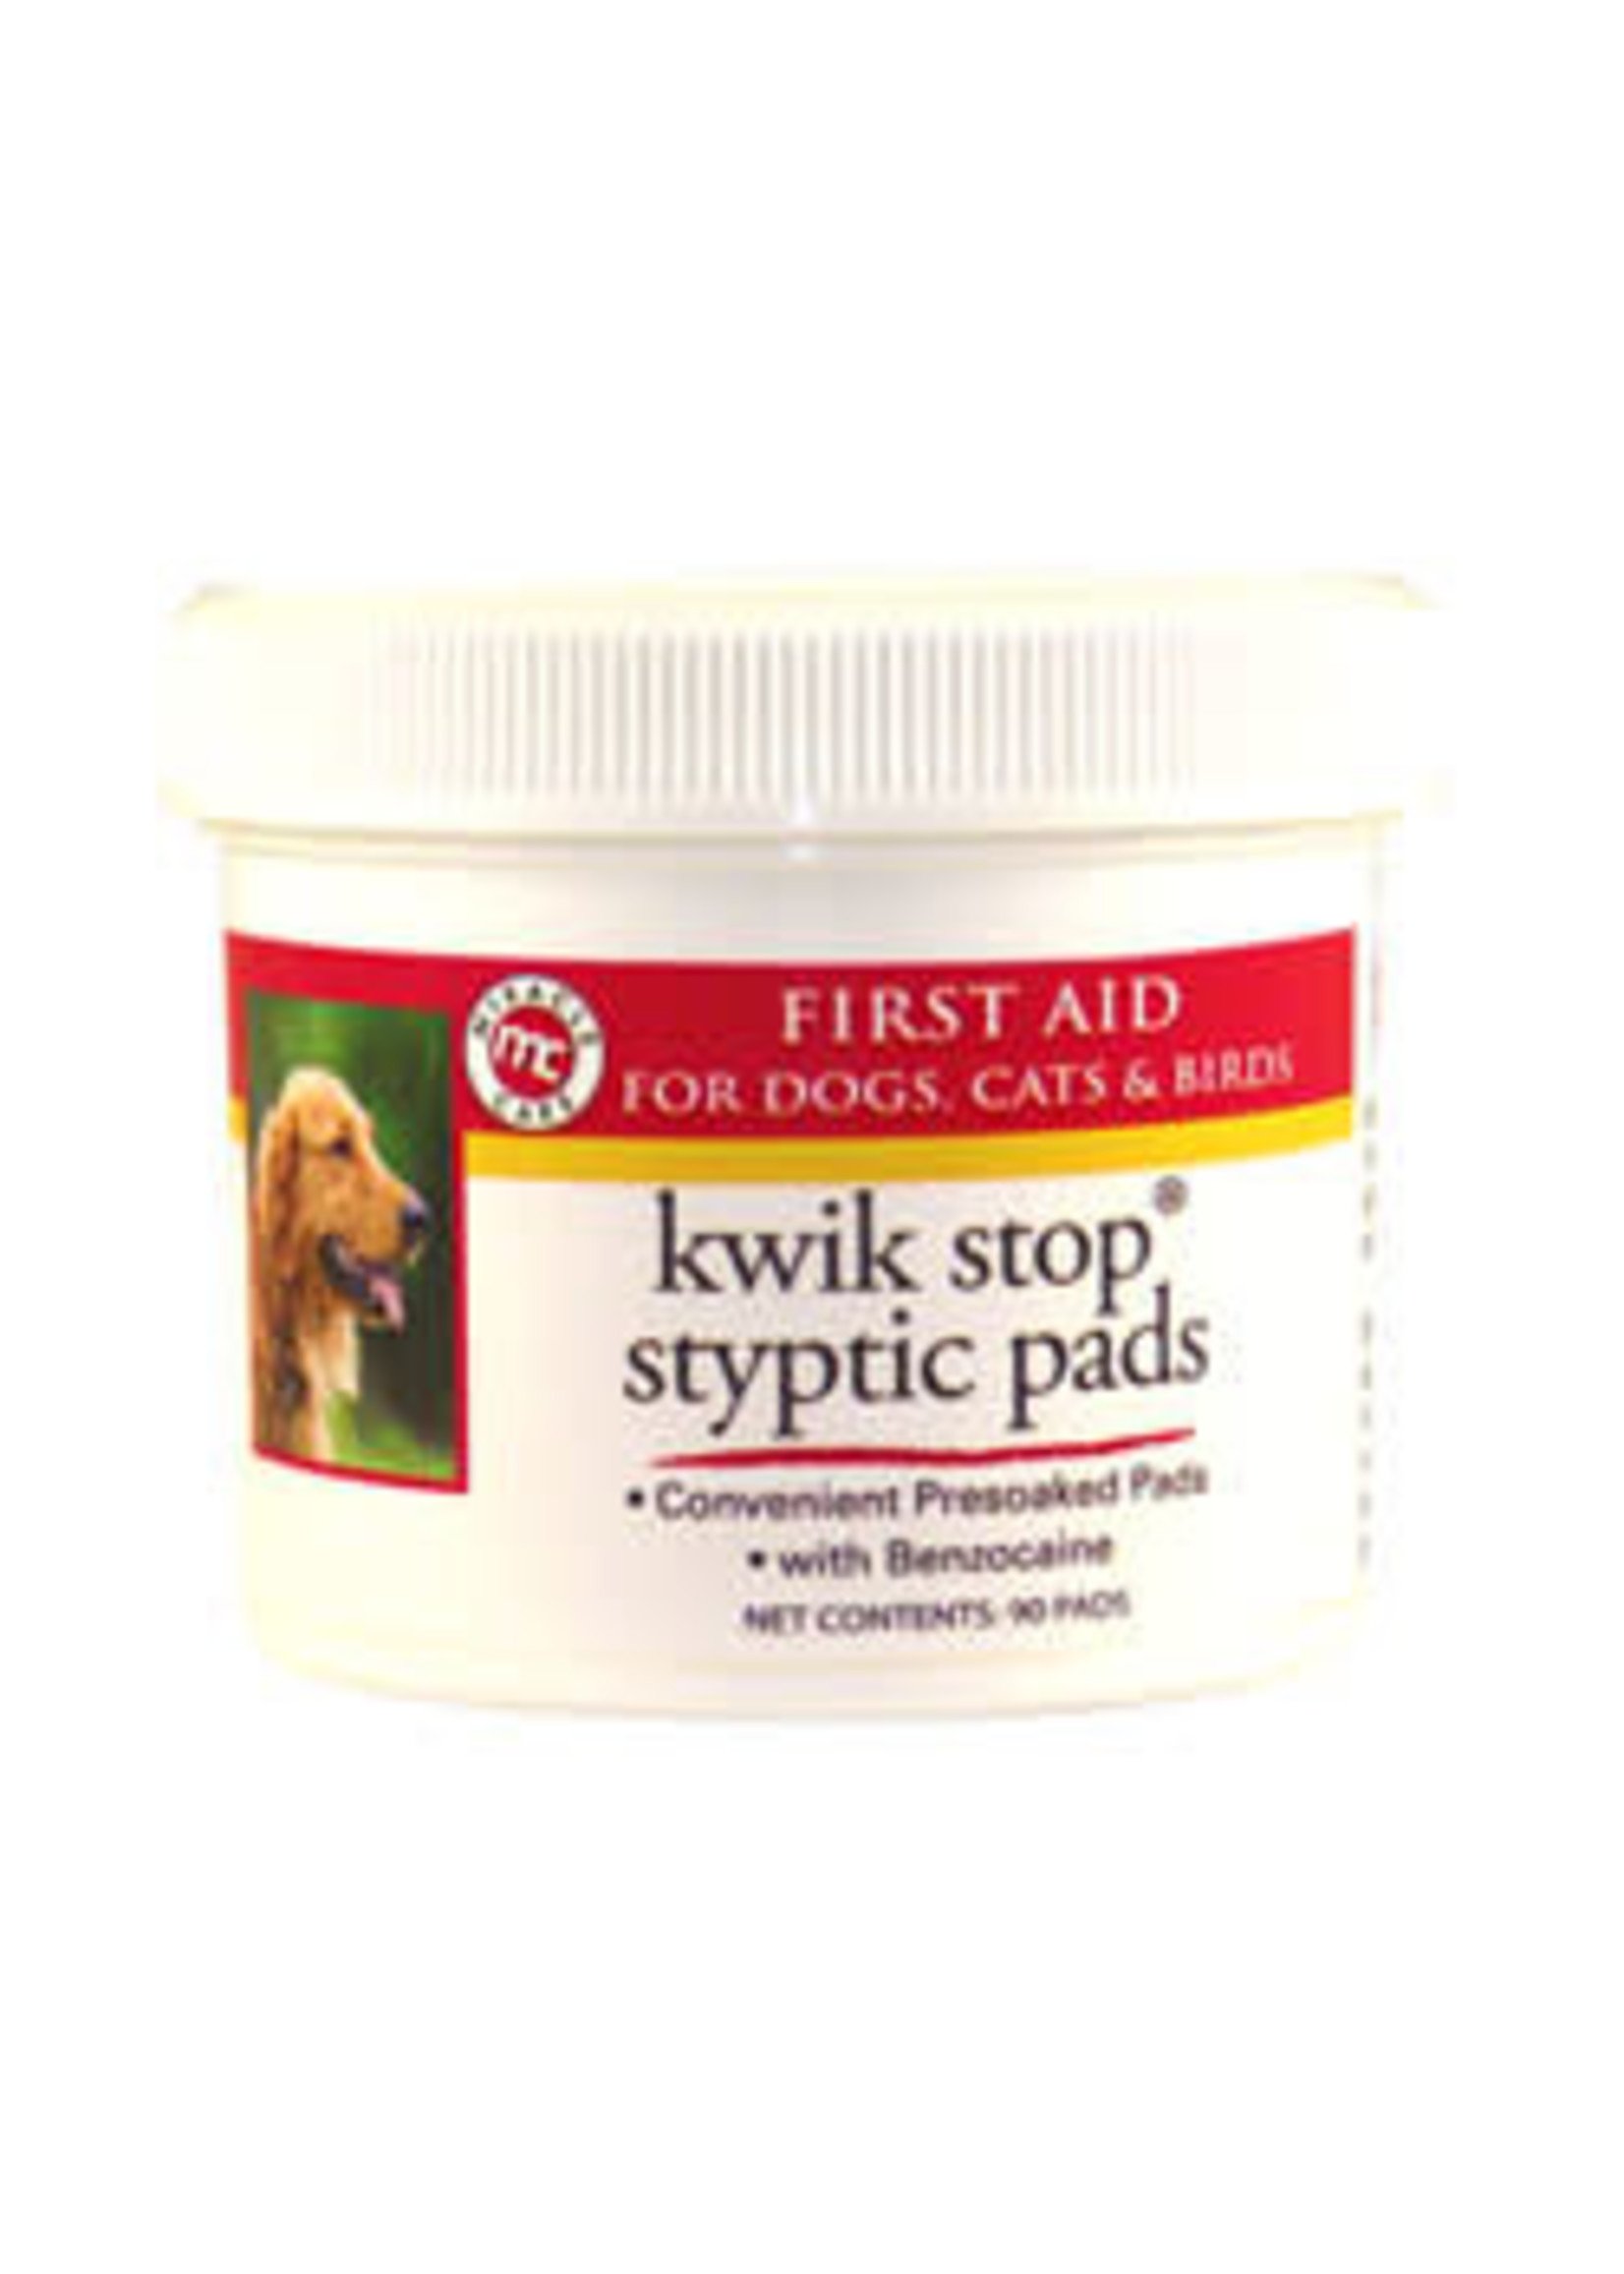 Miracle Corp Products Miracle Care First Aid Kwik Stop Syptic Pads